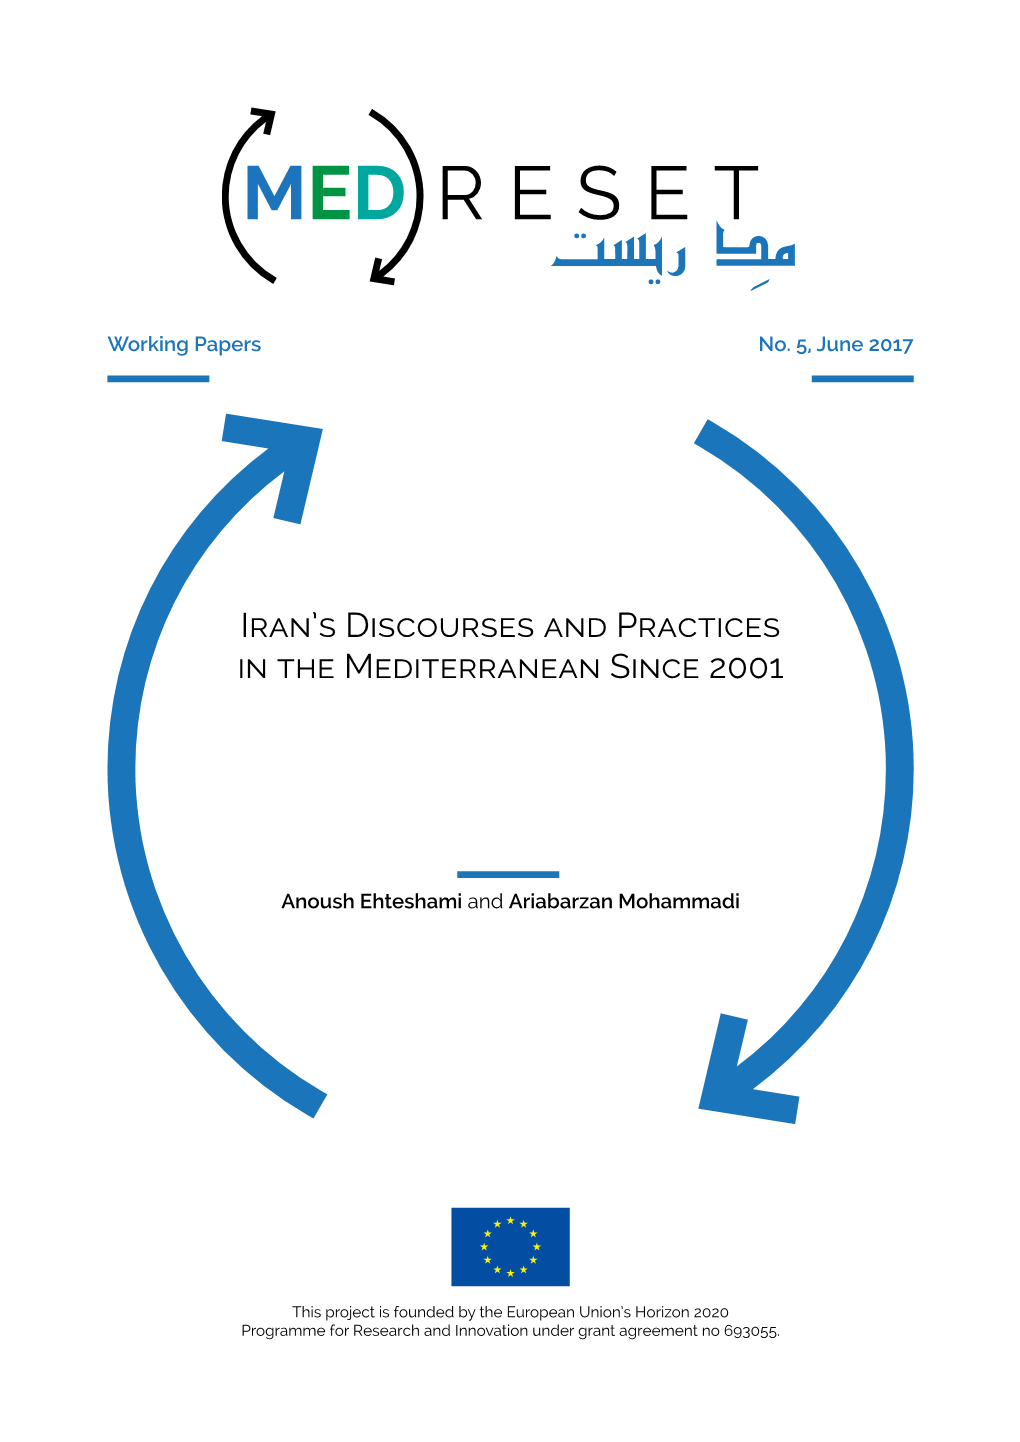 Iran's Discourses and Practices in the Mediterranean Since 2001